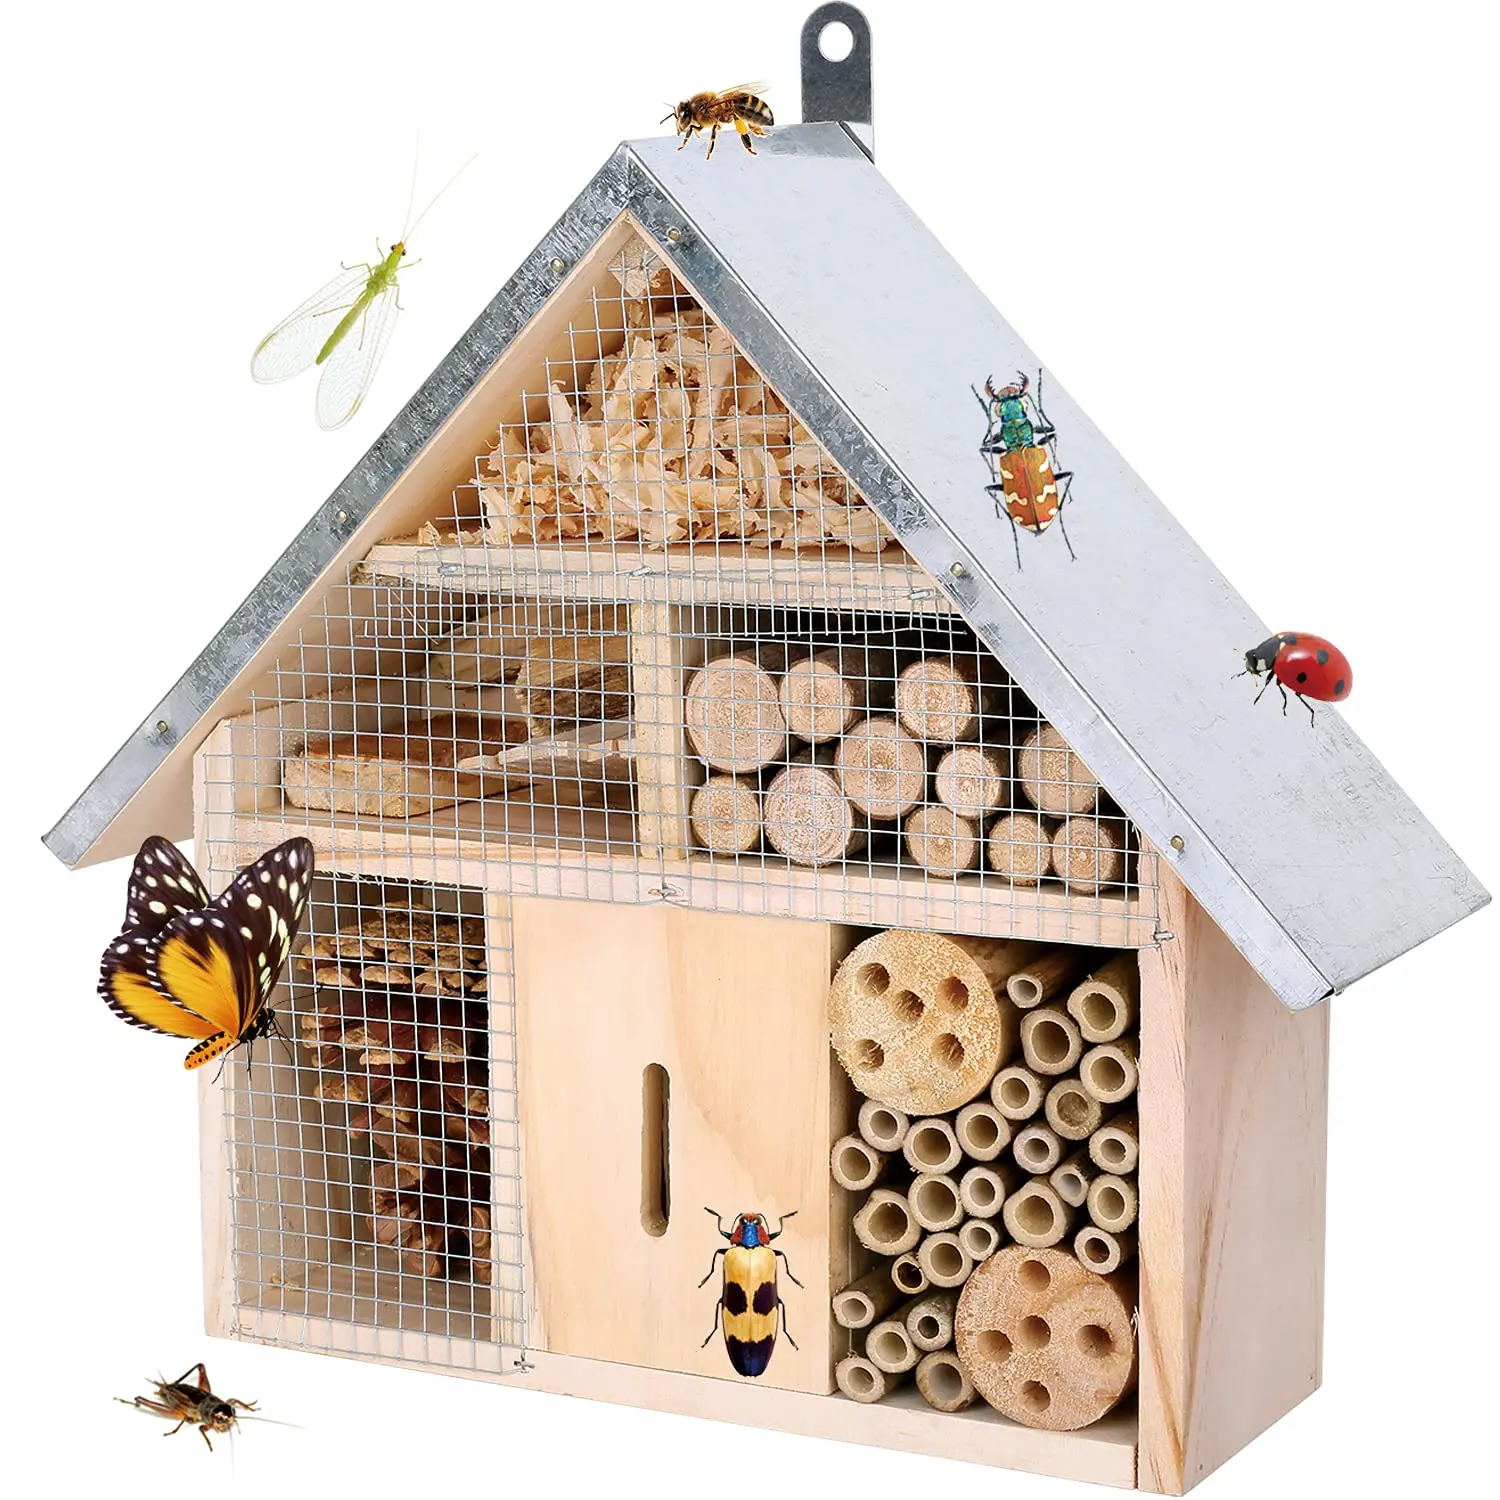 Wooden Insect House for Garden Insect Hotel for Ladybugs Mason Bees Butterflies Ladybirds Hanging Bamboo Habitat